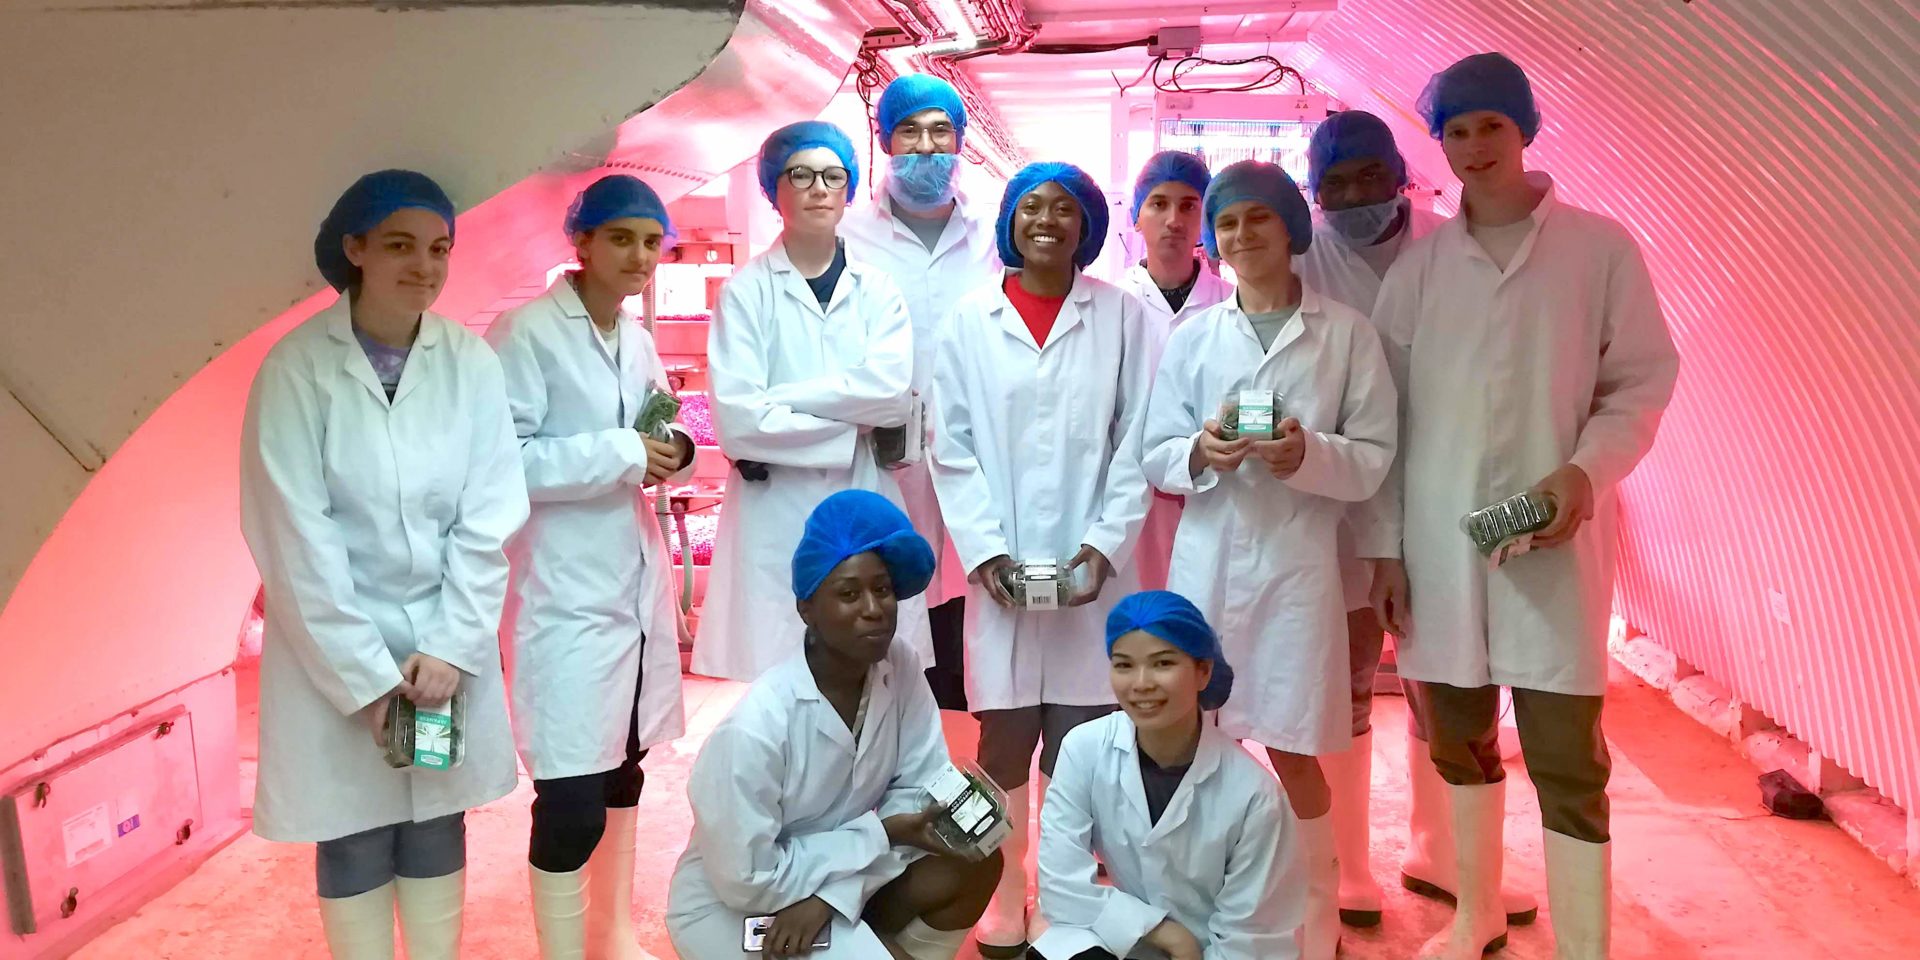 A group of young people pose for a group photo inside a underground tunnel lit by a pink light. They are wearing white lab coats and protective nets on their hair and faces.